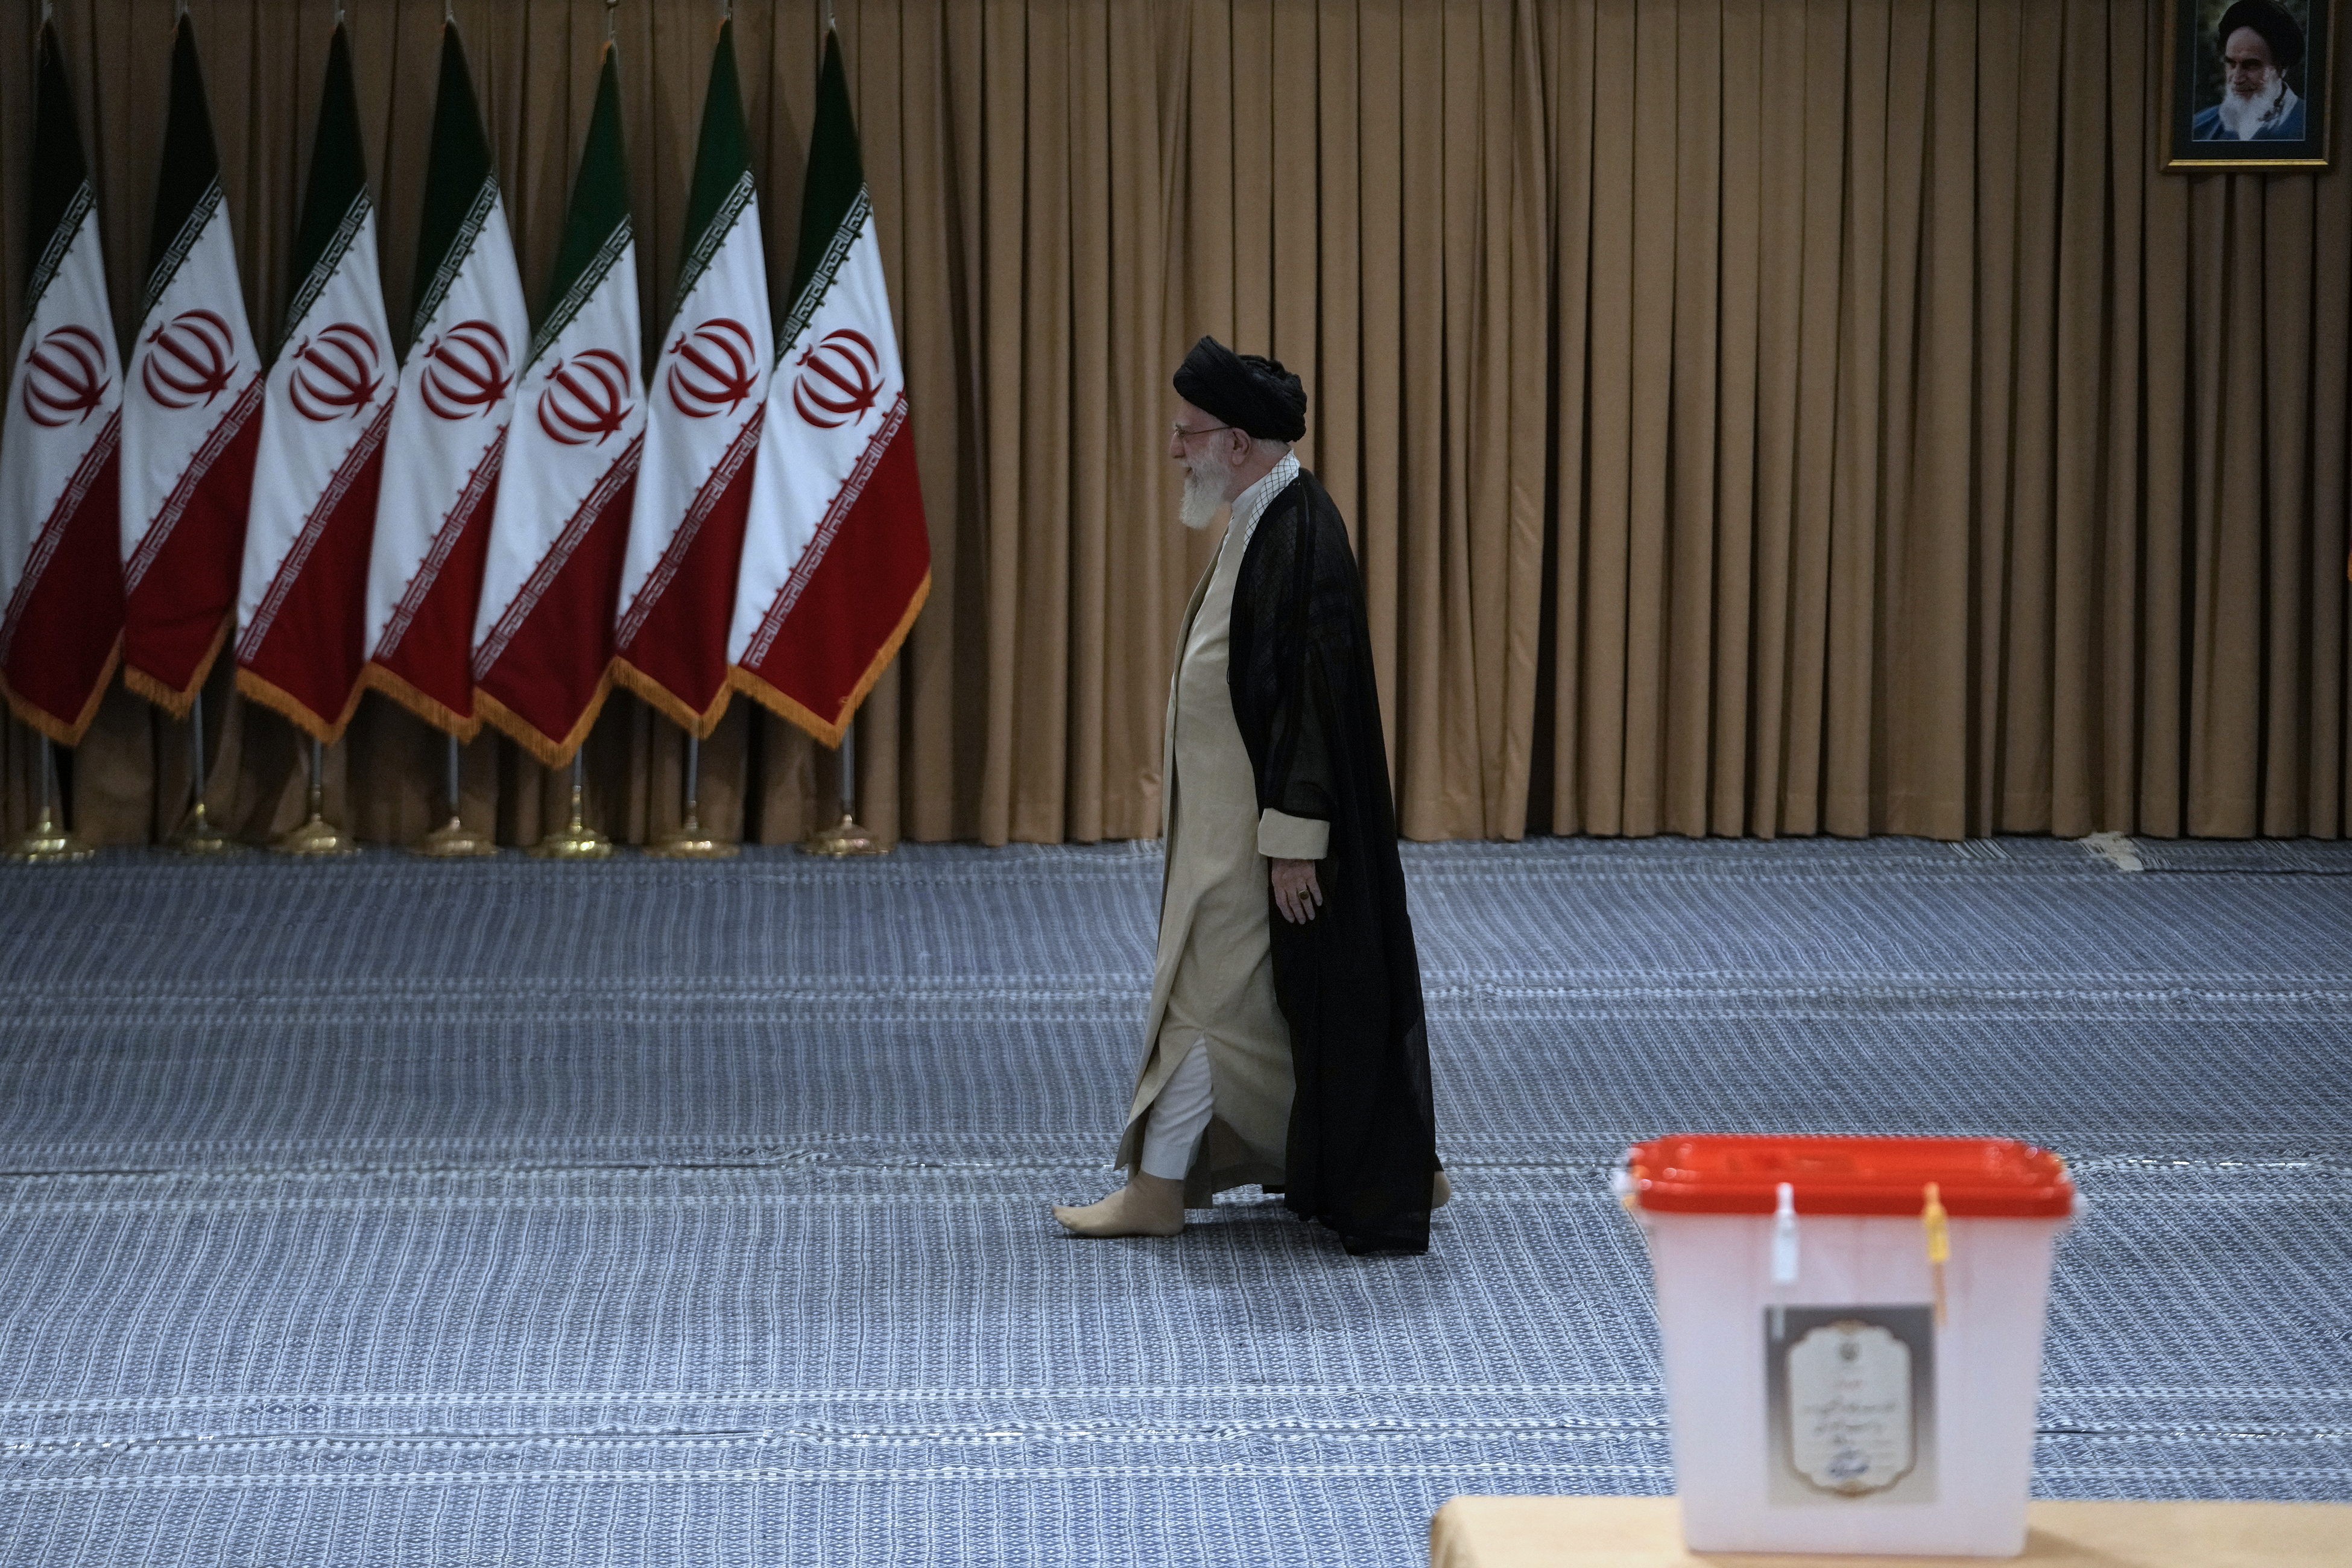 Iranian Supreme Leader Ayatollah Ali Khamenei arrives to vote for the presidential runoff election in Tehran, Iran, Friday, July 5, 2024. Iranians began voting Friday in a runoff election to replace the late President Ebrahim Raisi, killed in a helicopter crash last month, as public apathy has become pervasive in the Islamic Republic after years of economic woes, mass protests and tensions in the Middle East. A picture of the late revolutionary founder Ayatollah Khomeini hangs on top right. (AP Photo/Vahid Salemi)